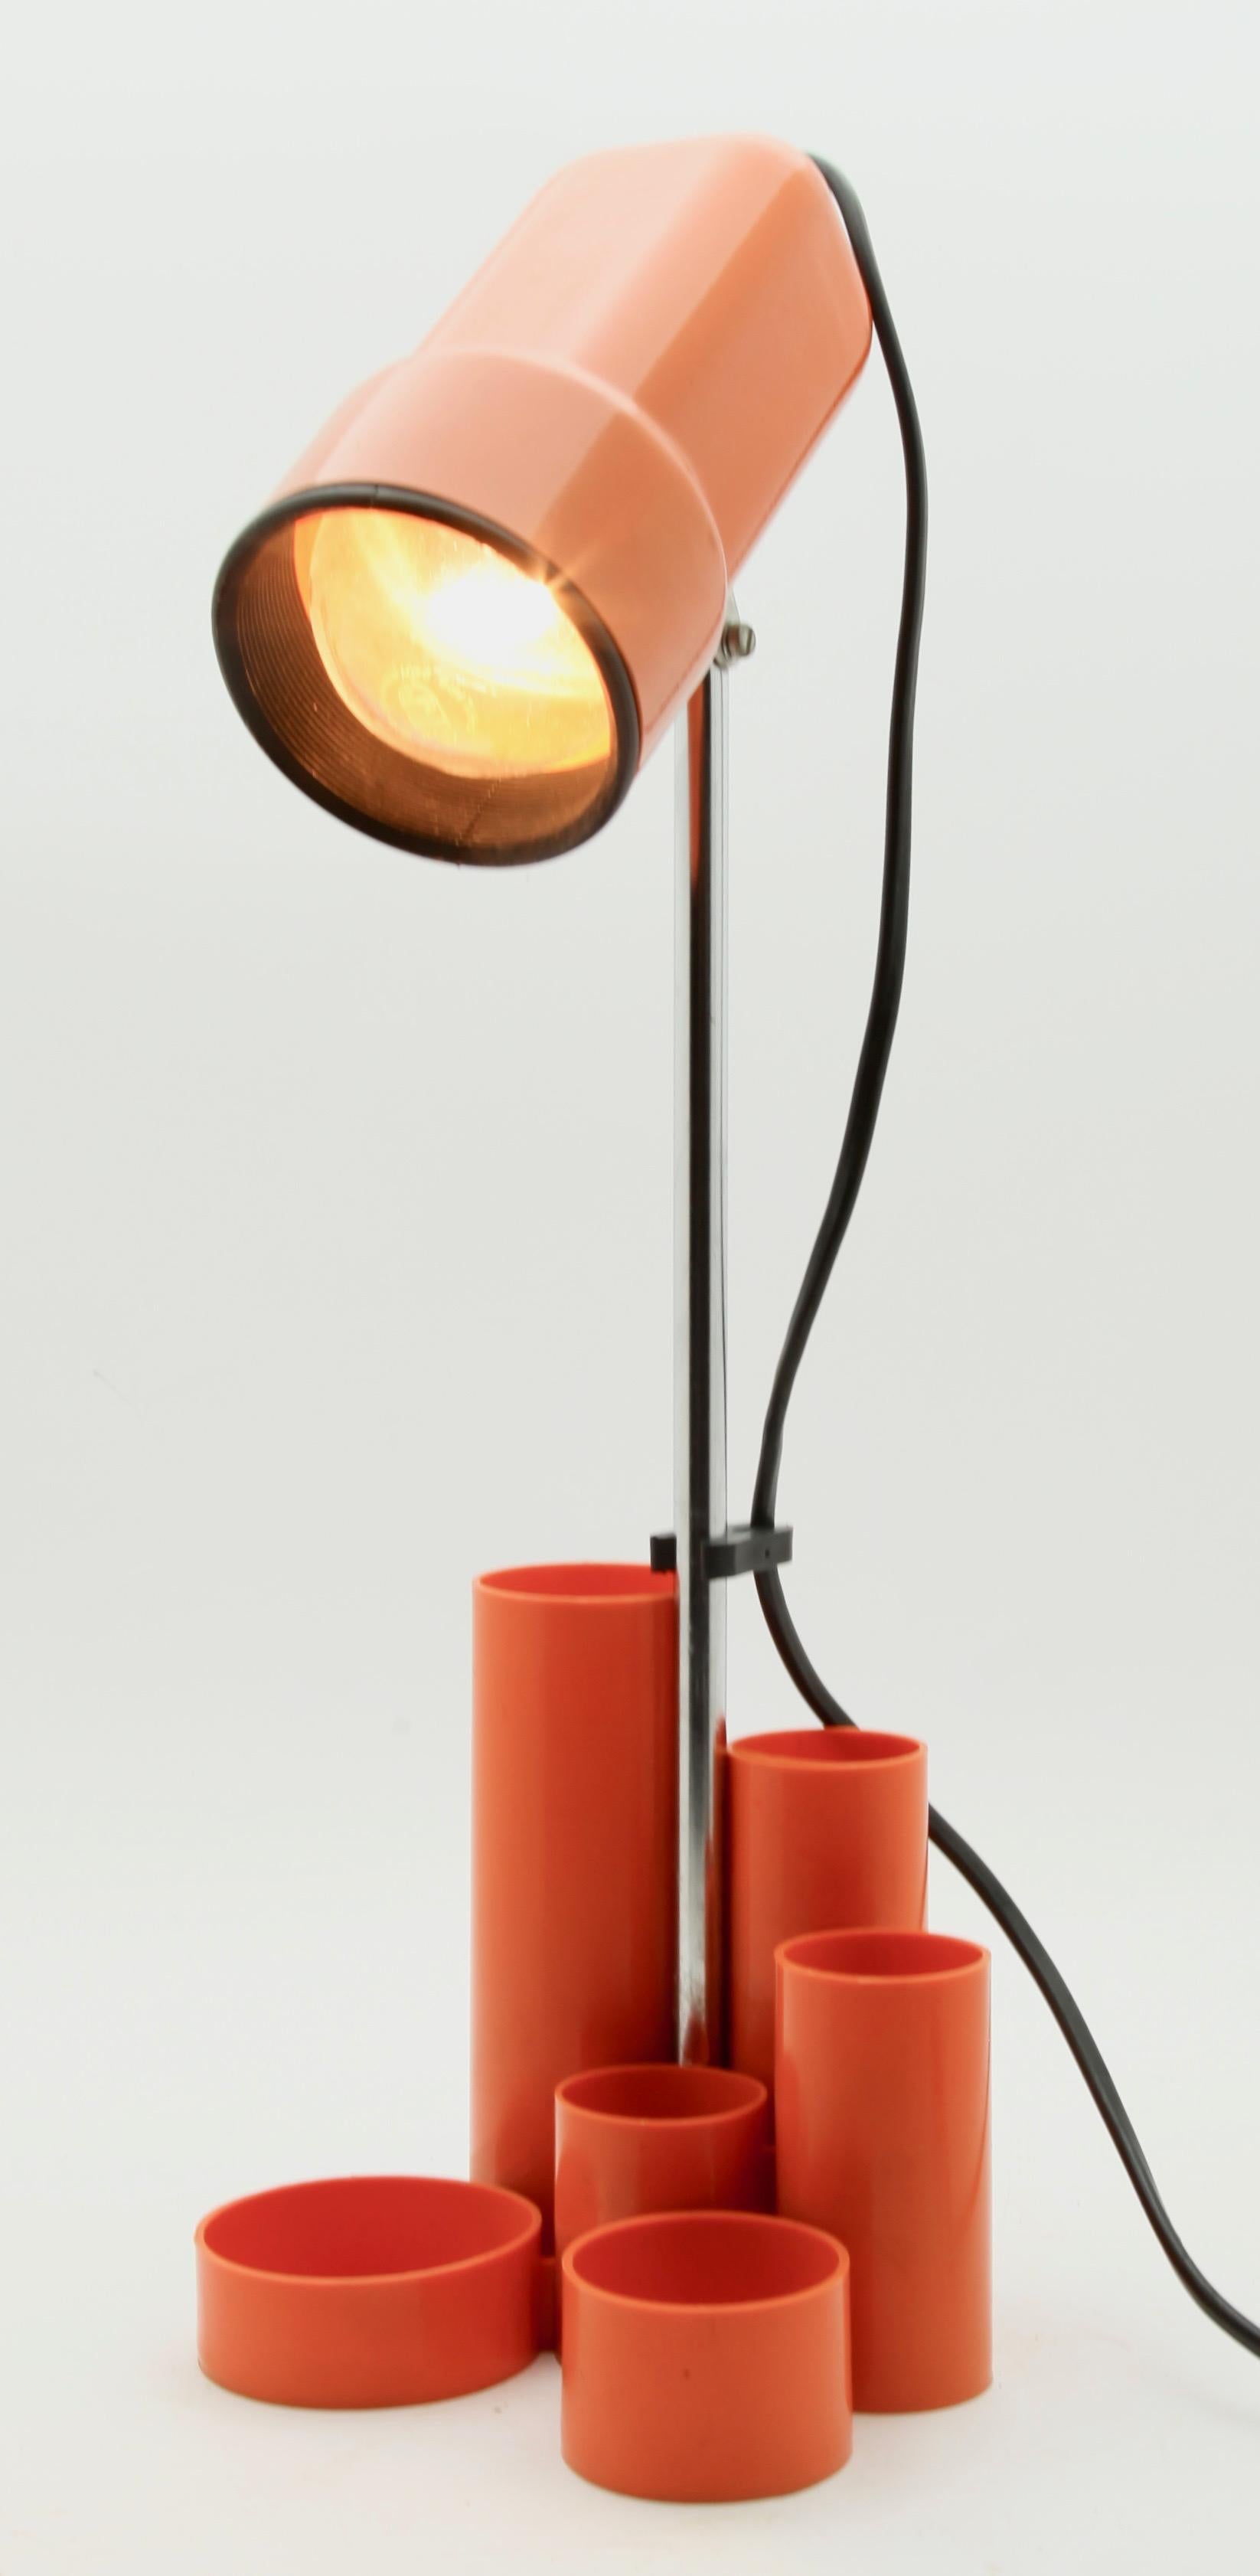 Mid-Century Modern Desk Lamp with Pen-Holders in Bright Plastic, Chrome and Enameled Parts '1960s'